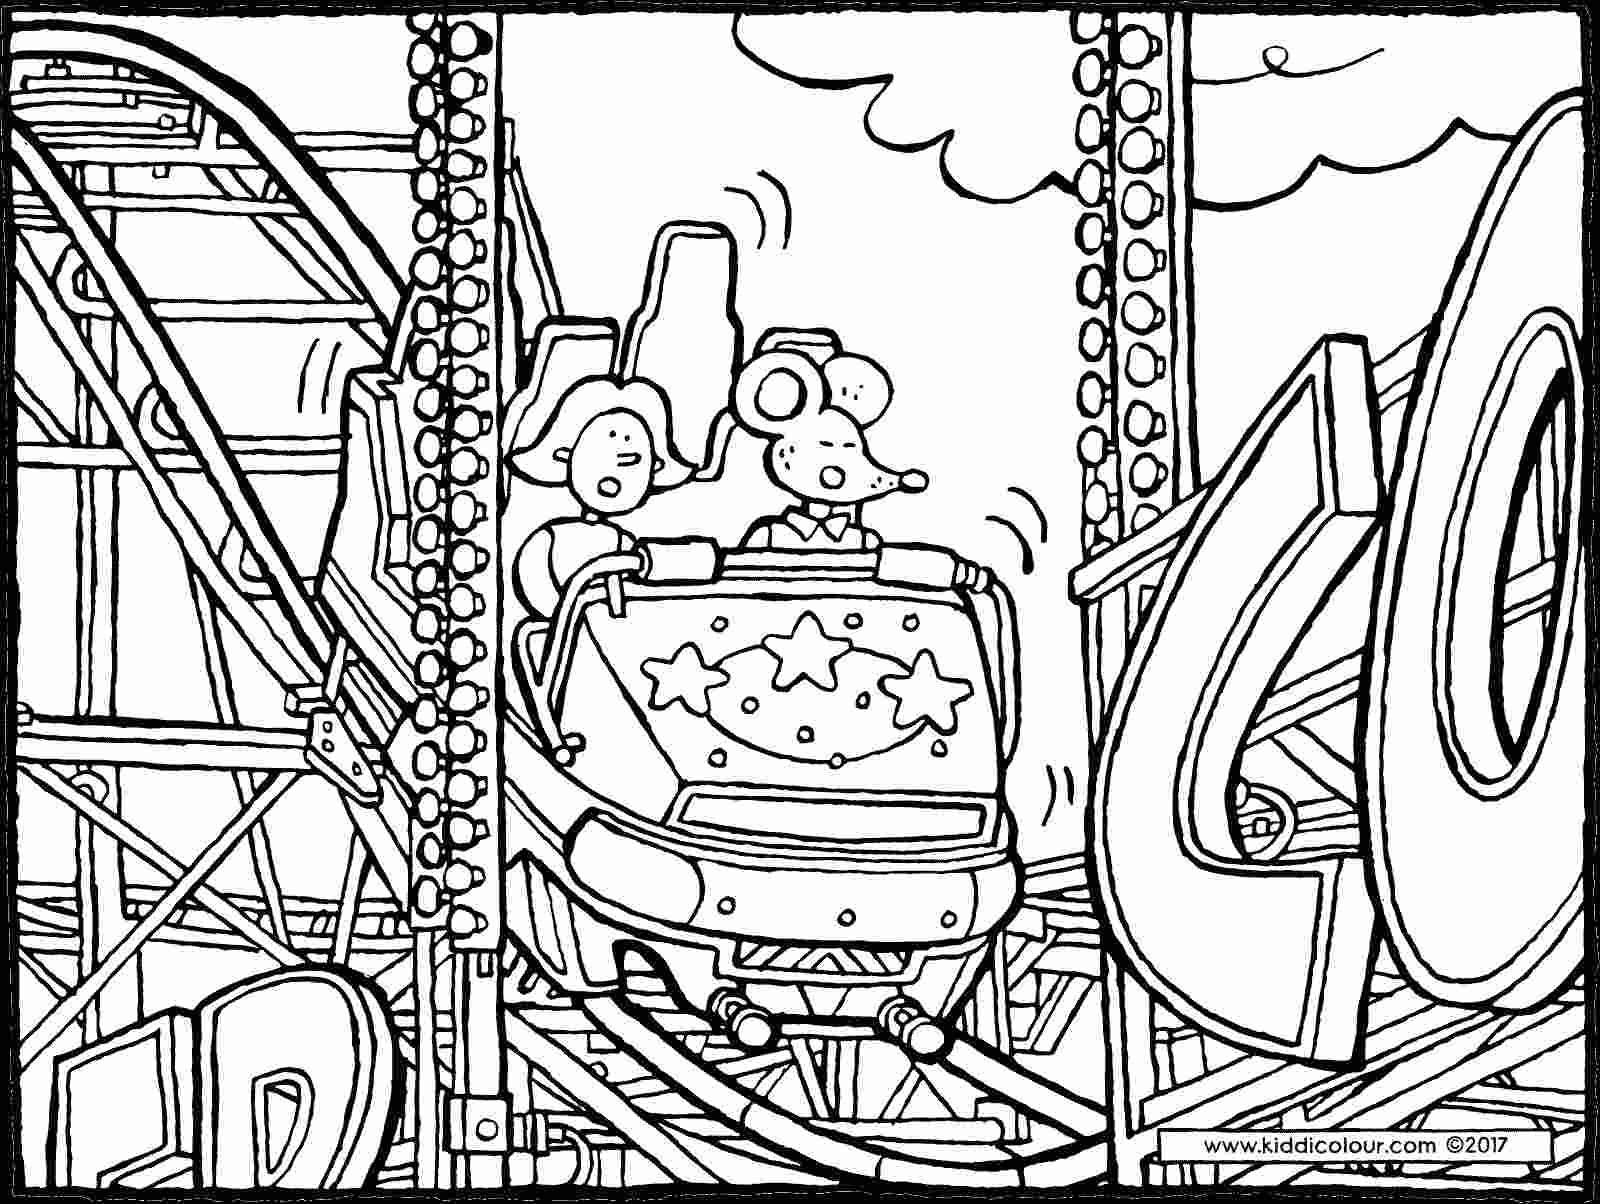 Roller Coaster Coloring Pages roller coaster coloring page roller ...